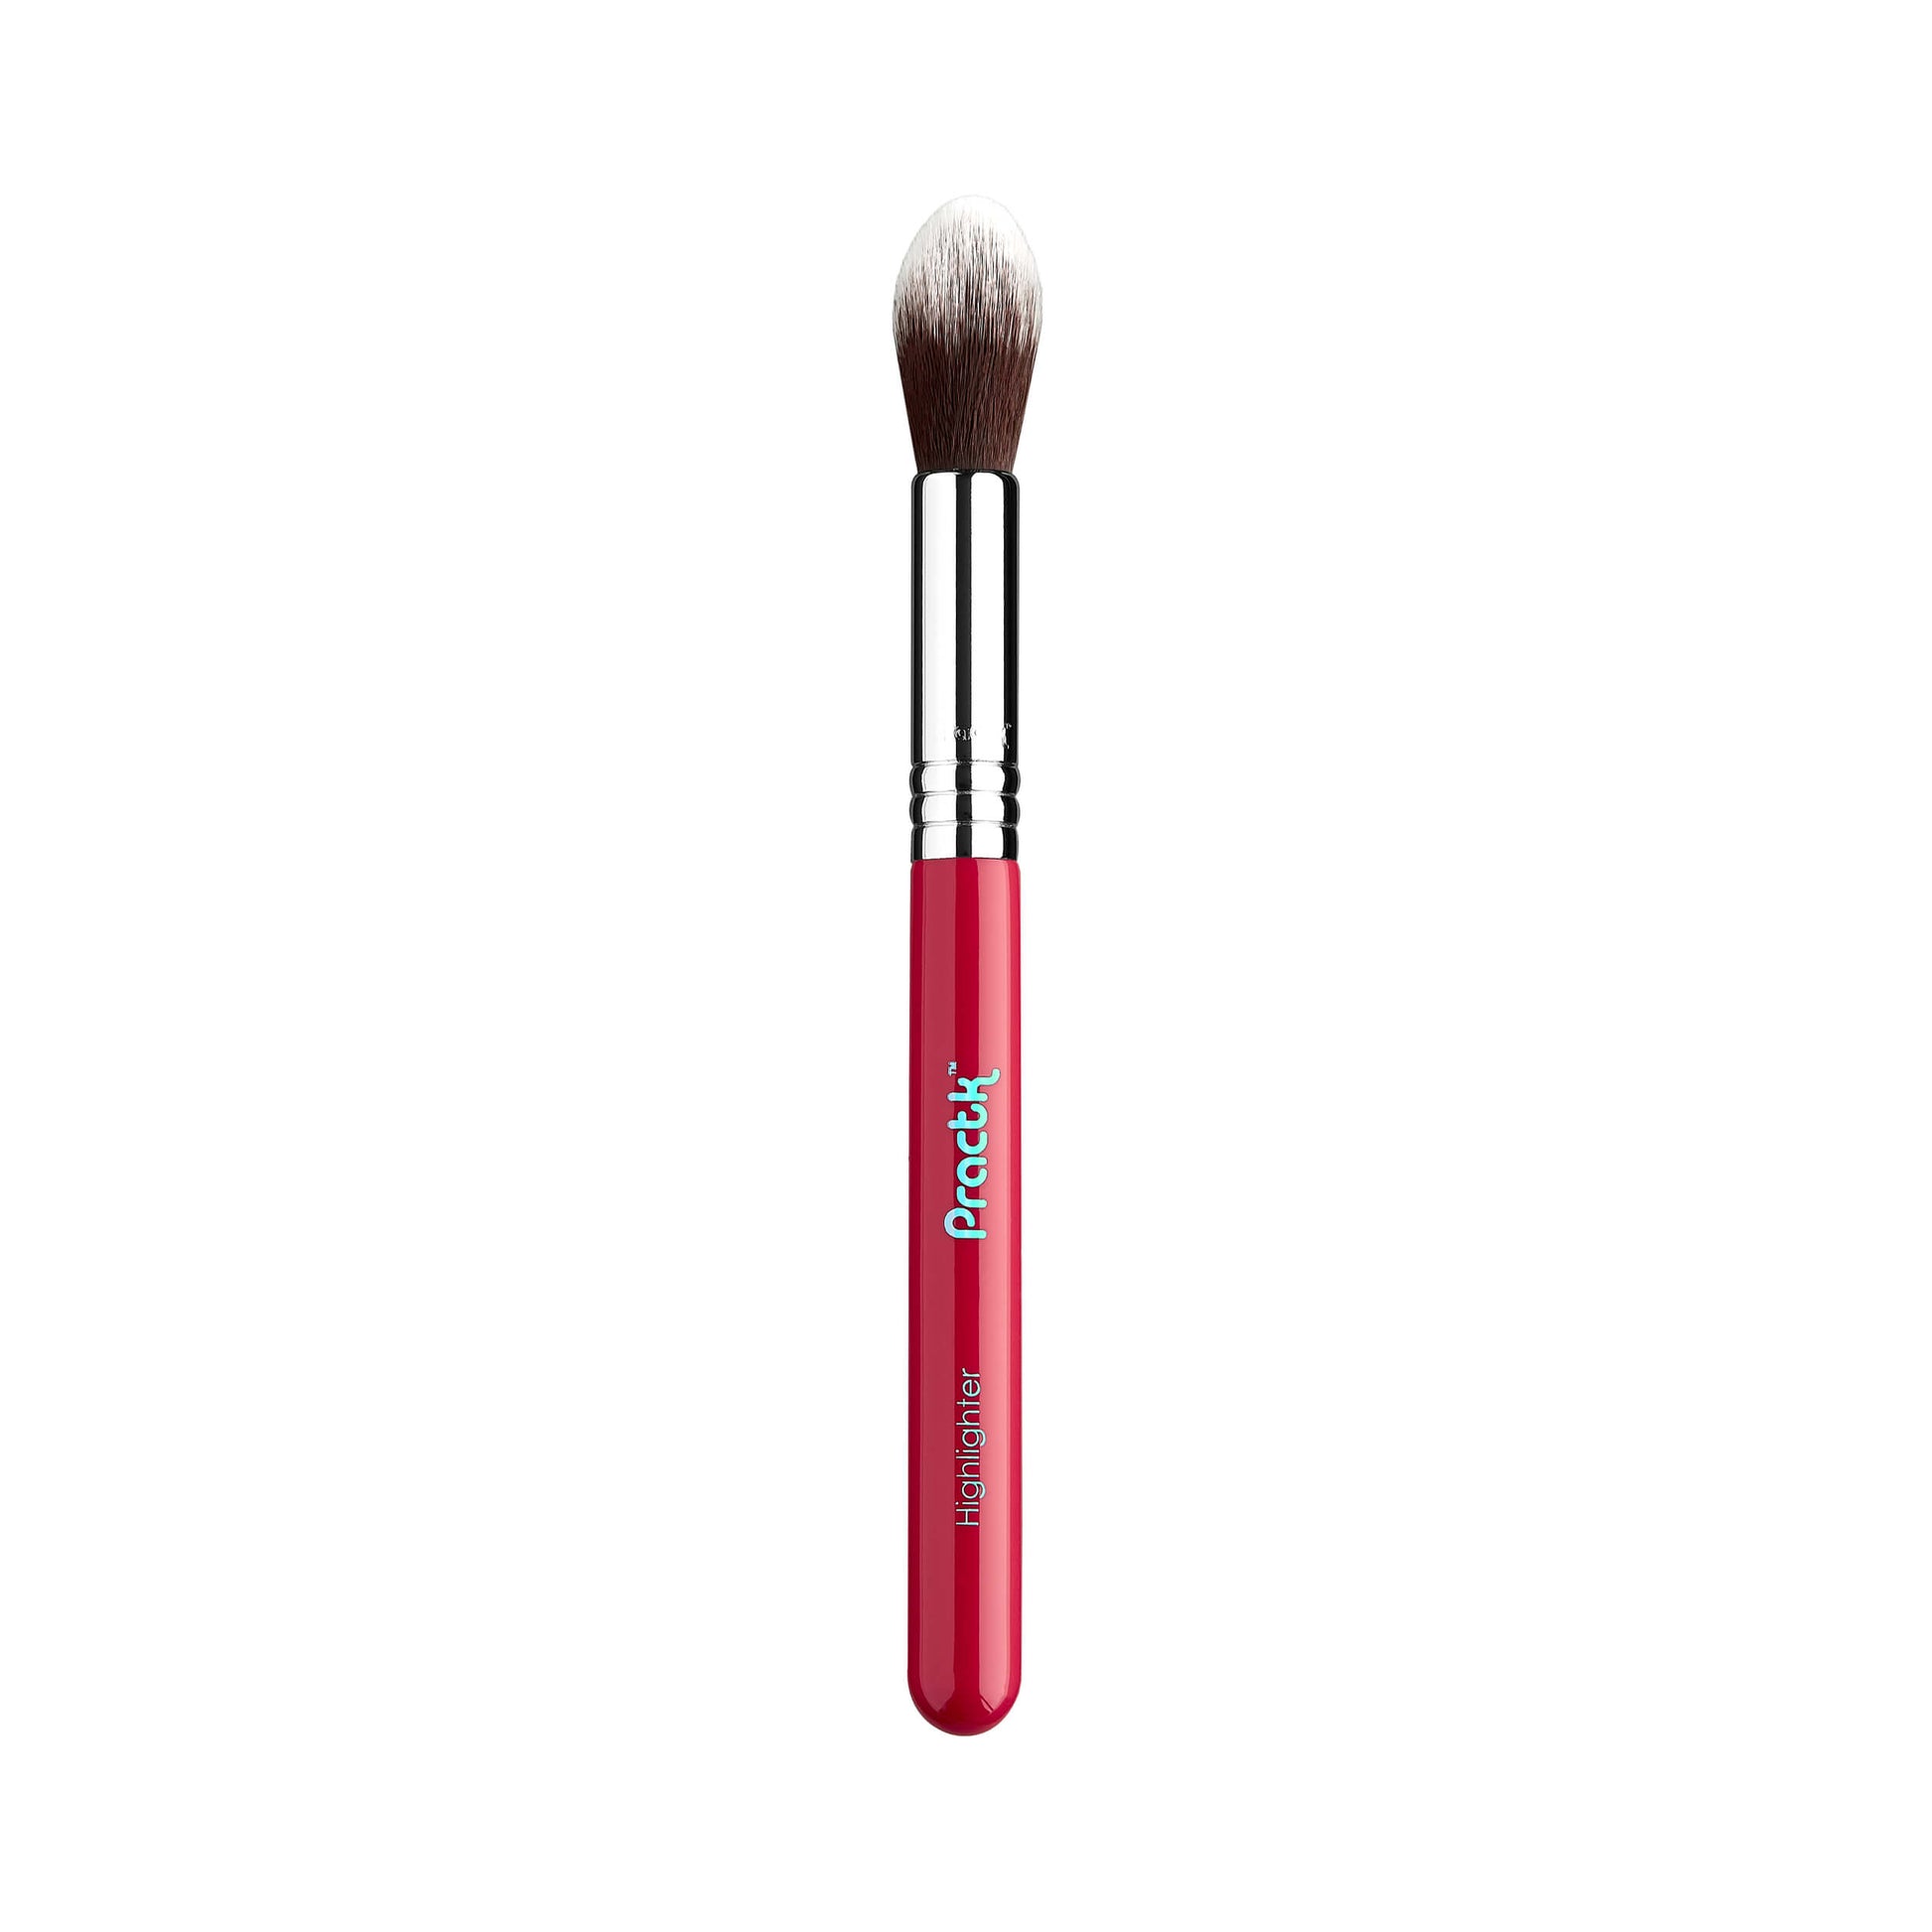 Practk (by Sigma Beauty) Highlighter Brush